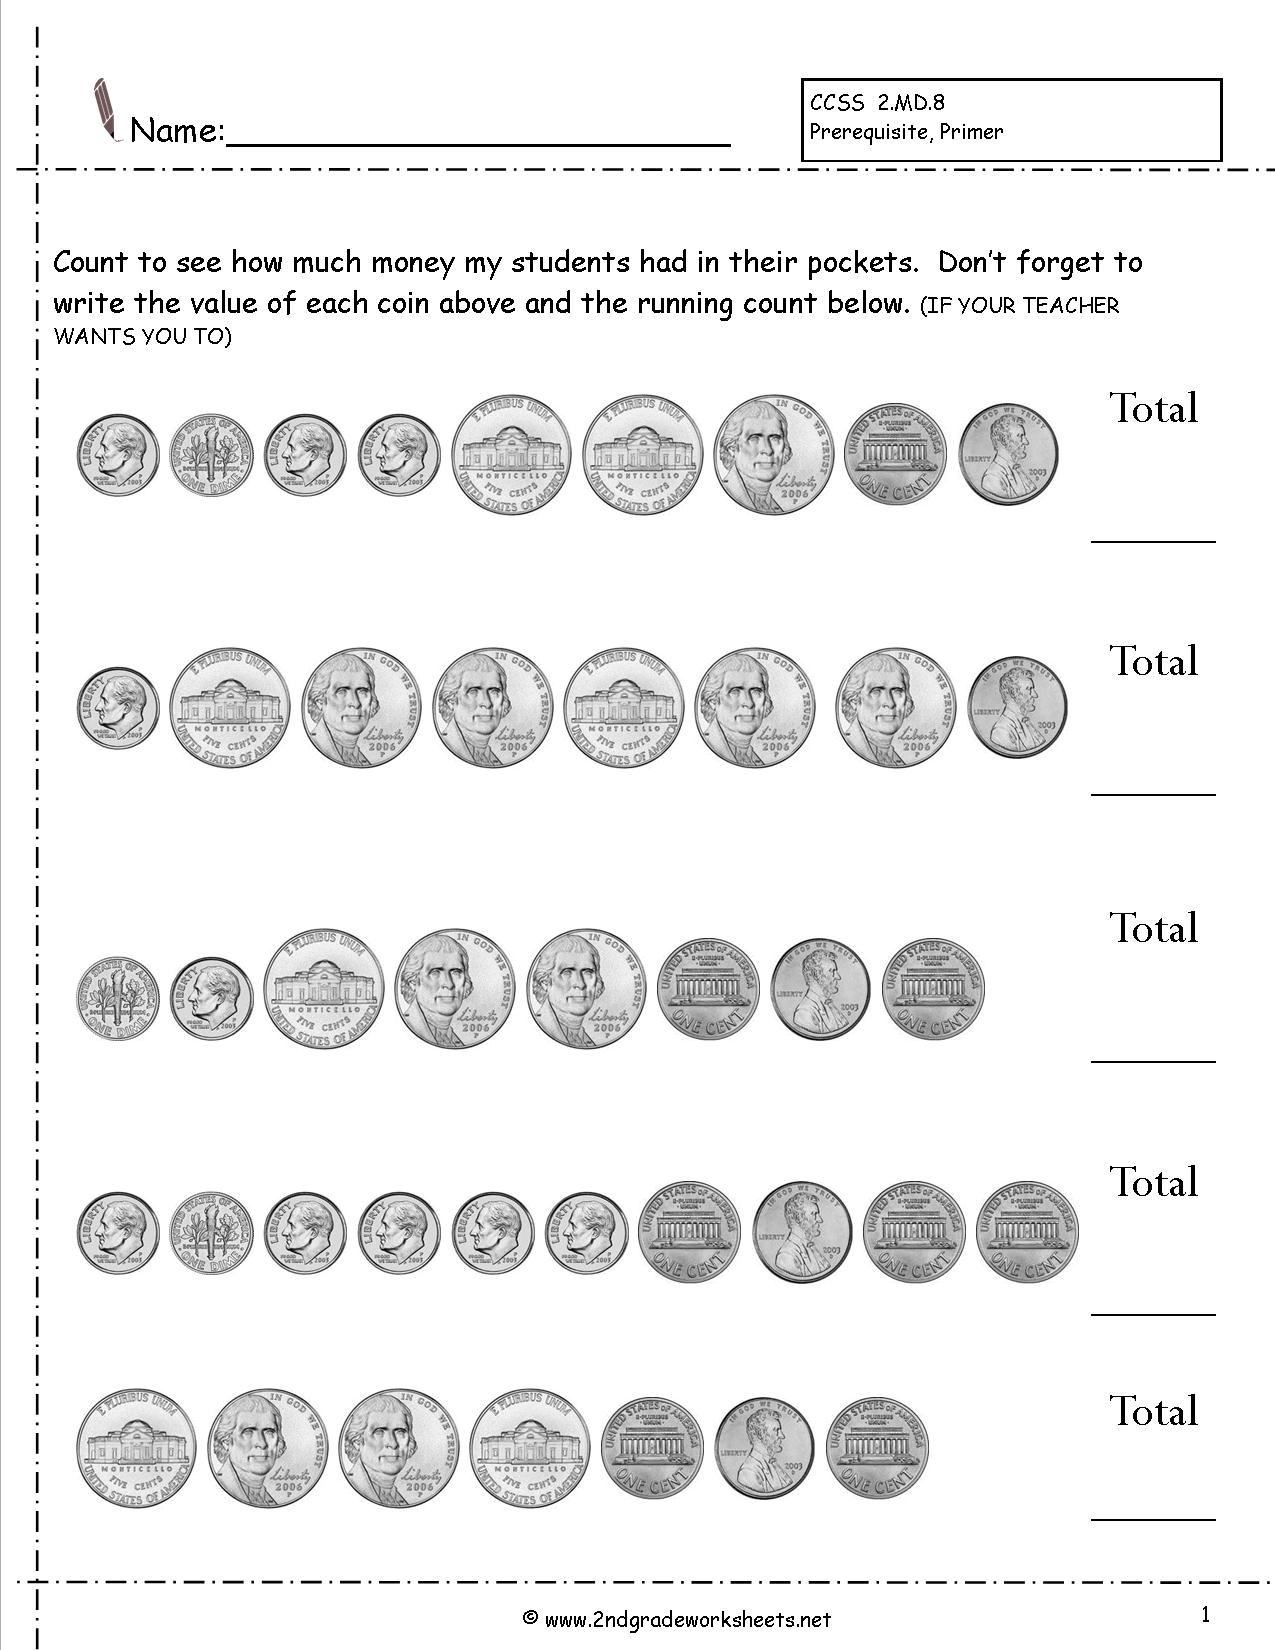 Counting Coins Worksheets 2nd Grade Image